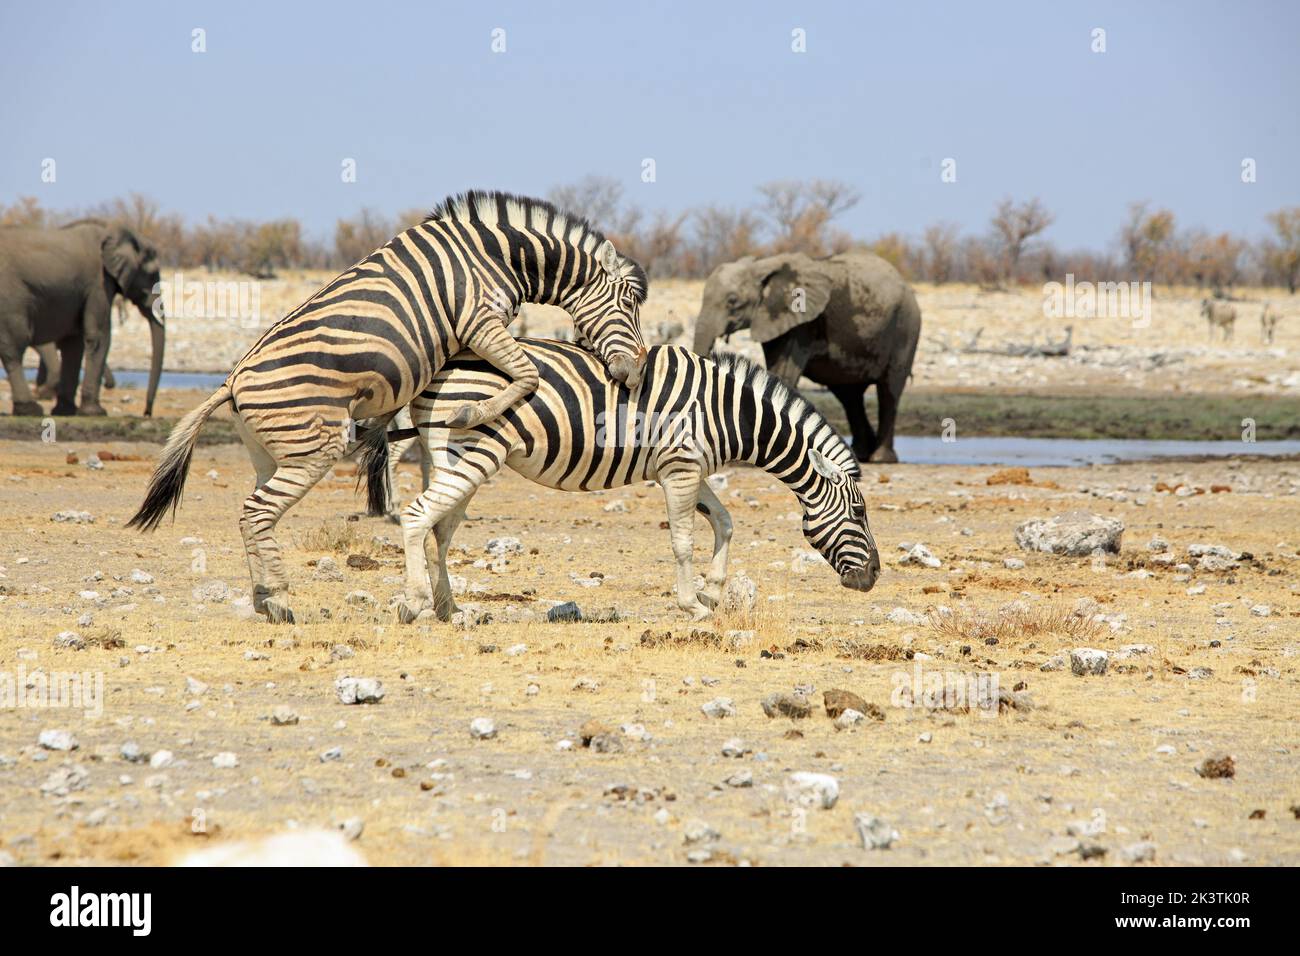 Two Zebras mating while two elephants watch on in the background - with a natural bush background and pale blue hazy sky. Rietfontein, Etosha National Stock Photo